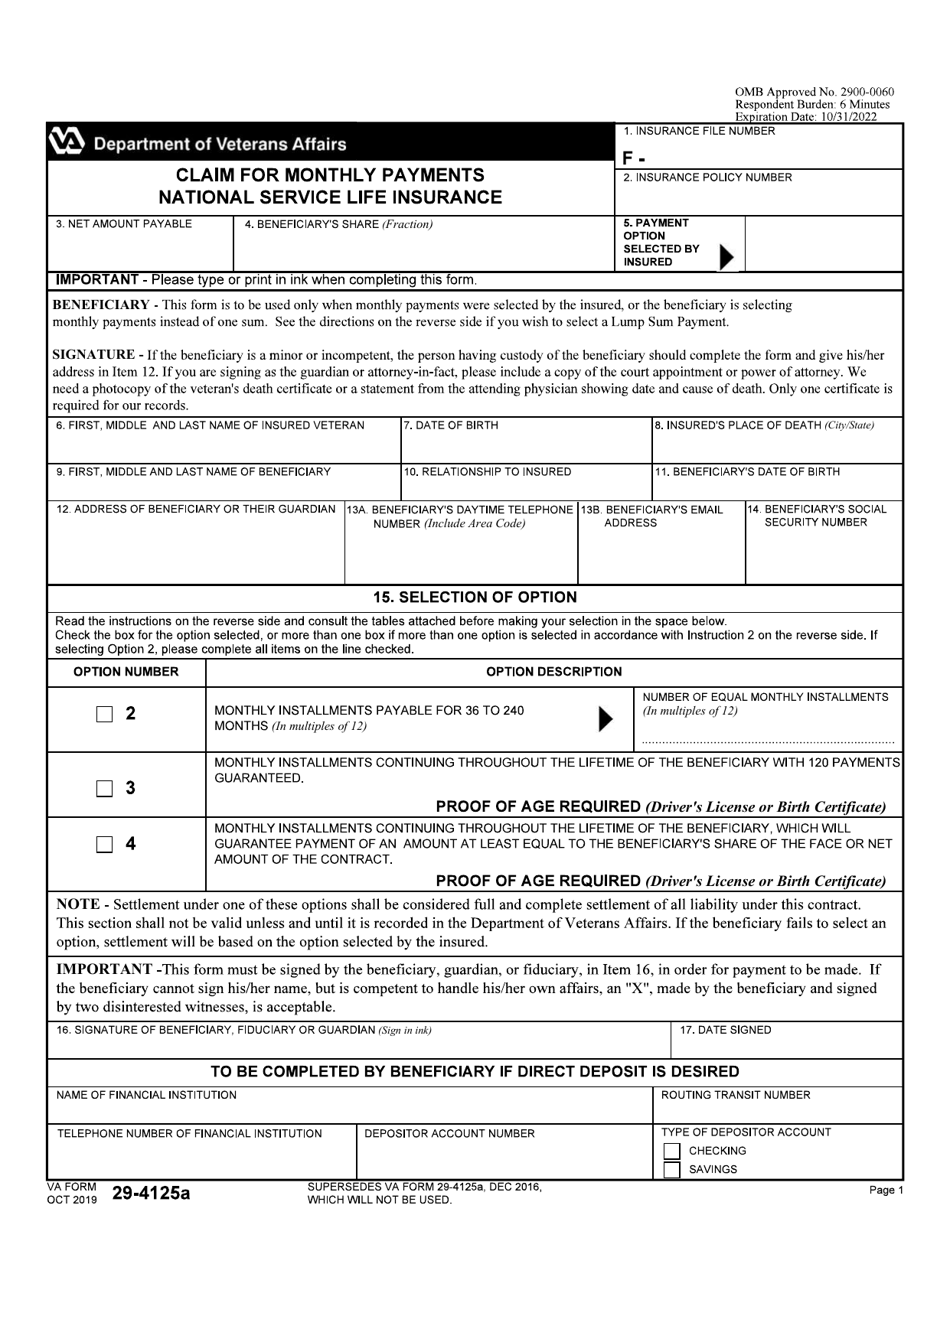 VA Form 29-4125A Claim for Monthly Payments - National Service Life Insurance, Page 1